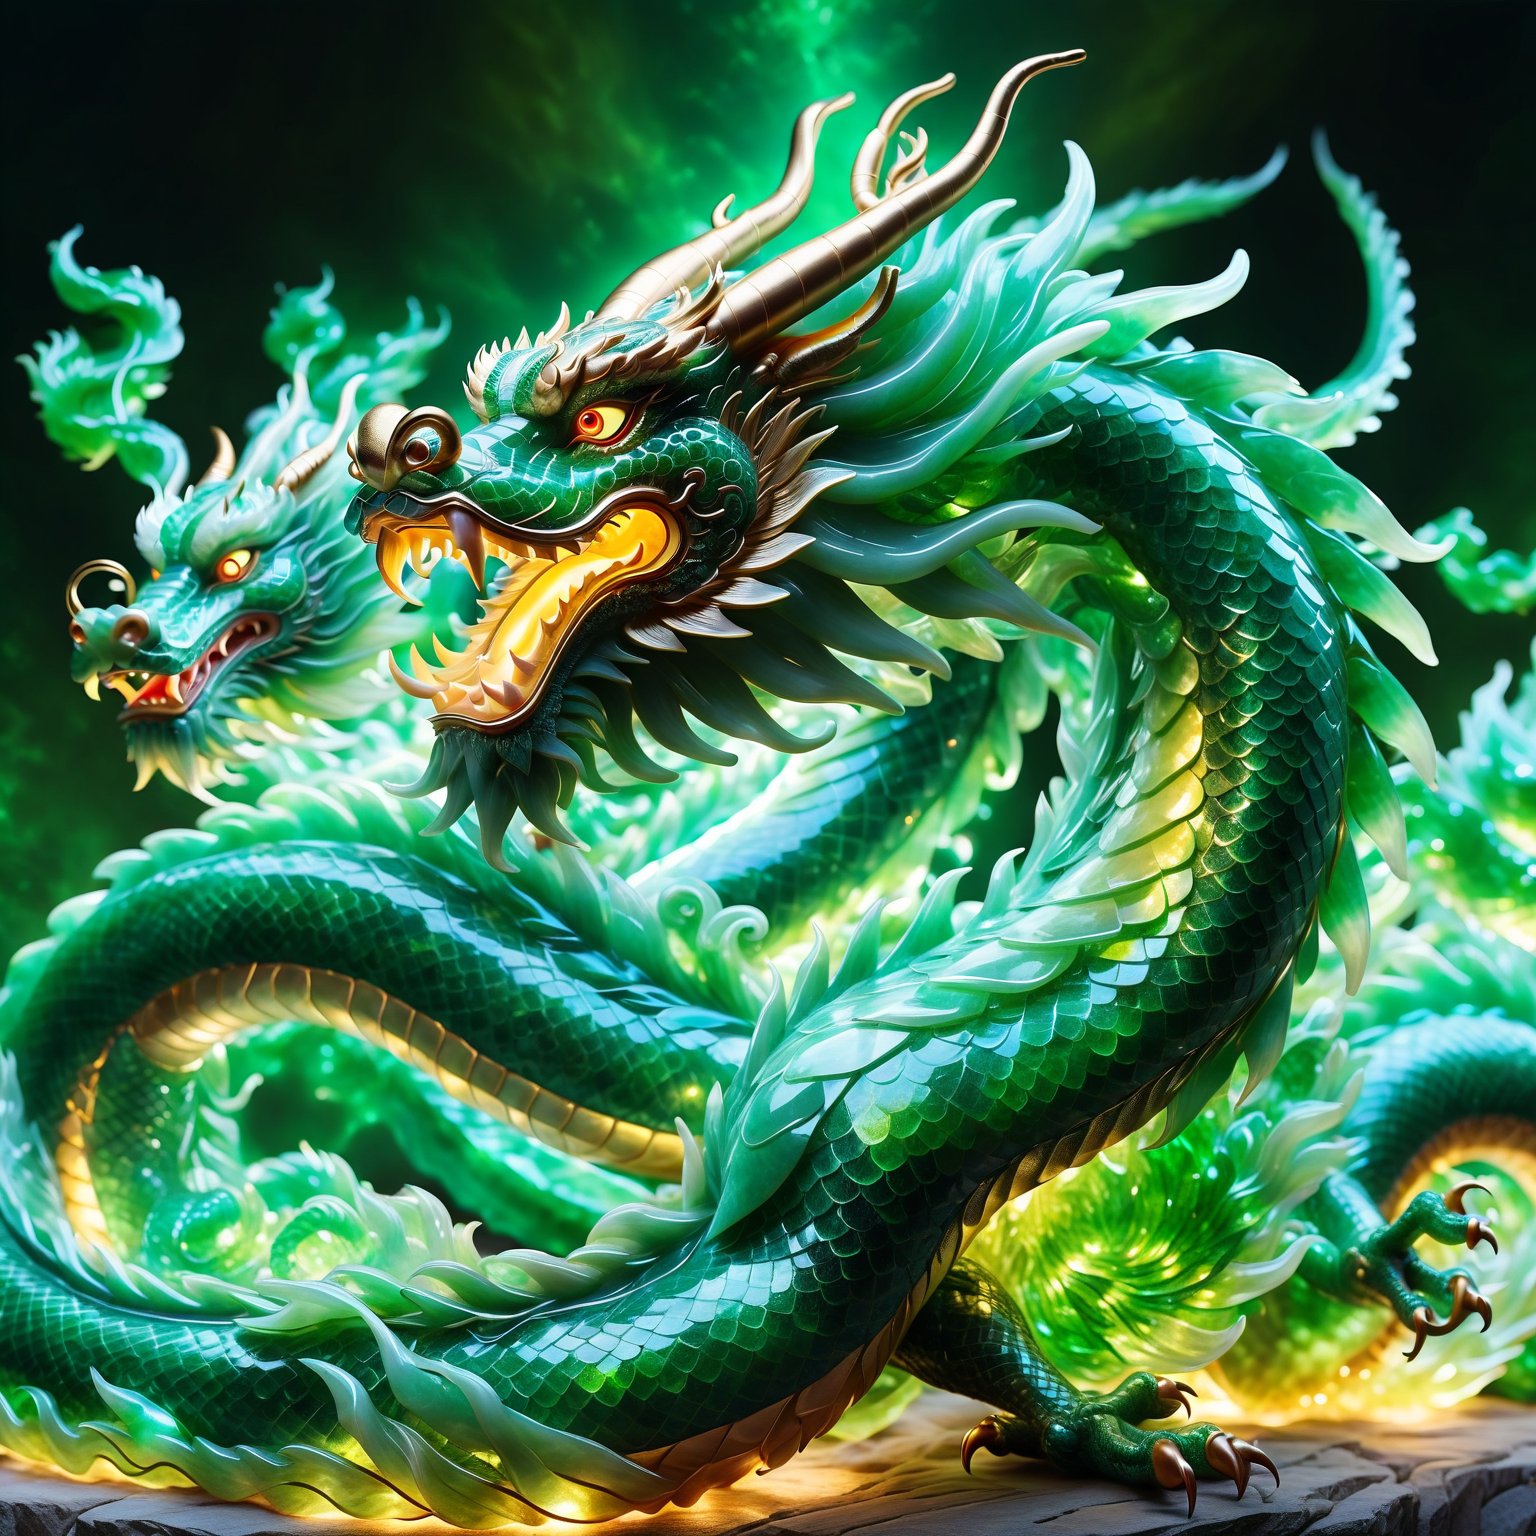 Chinese dragon made entirely of jade, shimmering and glowing, intricate jade texture, majestic and elegant, radiant green hues, sparkling with light, by FuturEvoLab, (masterpiece: 2), best quality, ultra highres, original, extremely detailed, perfect lighting, fantasy theme, magical aura